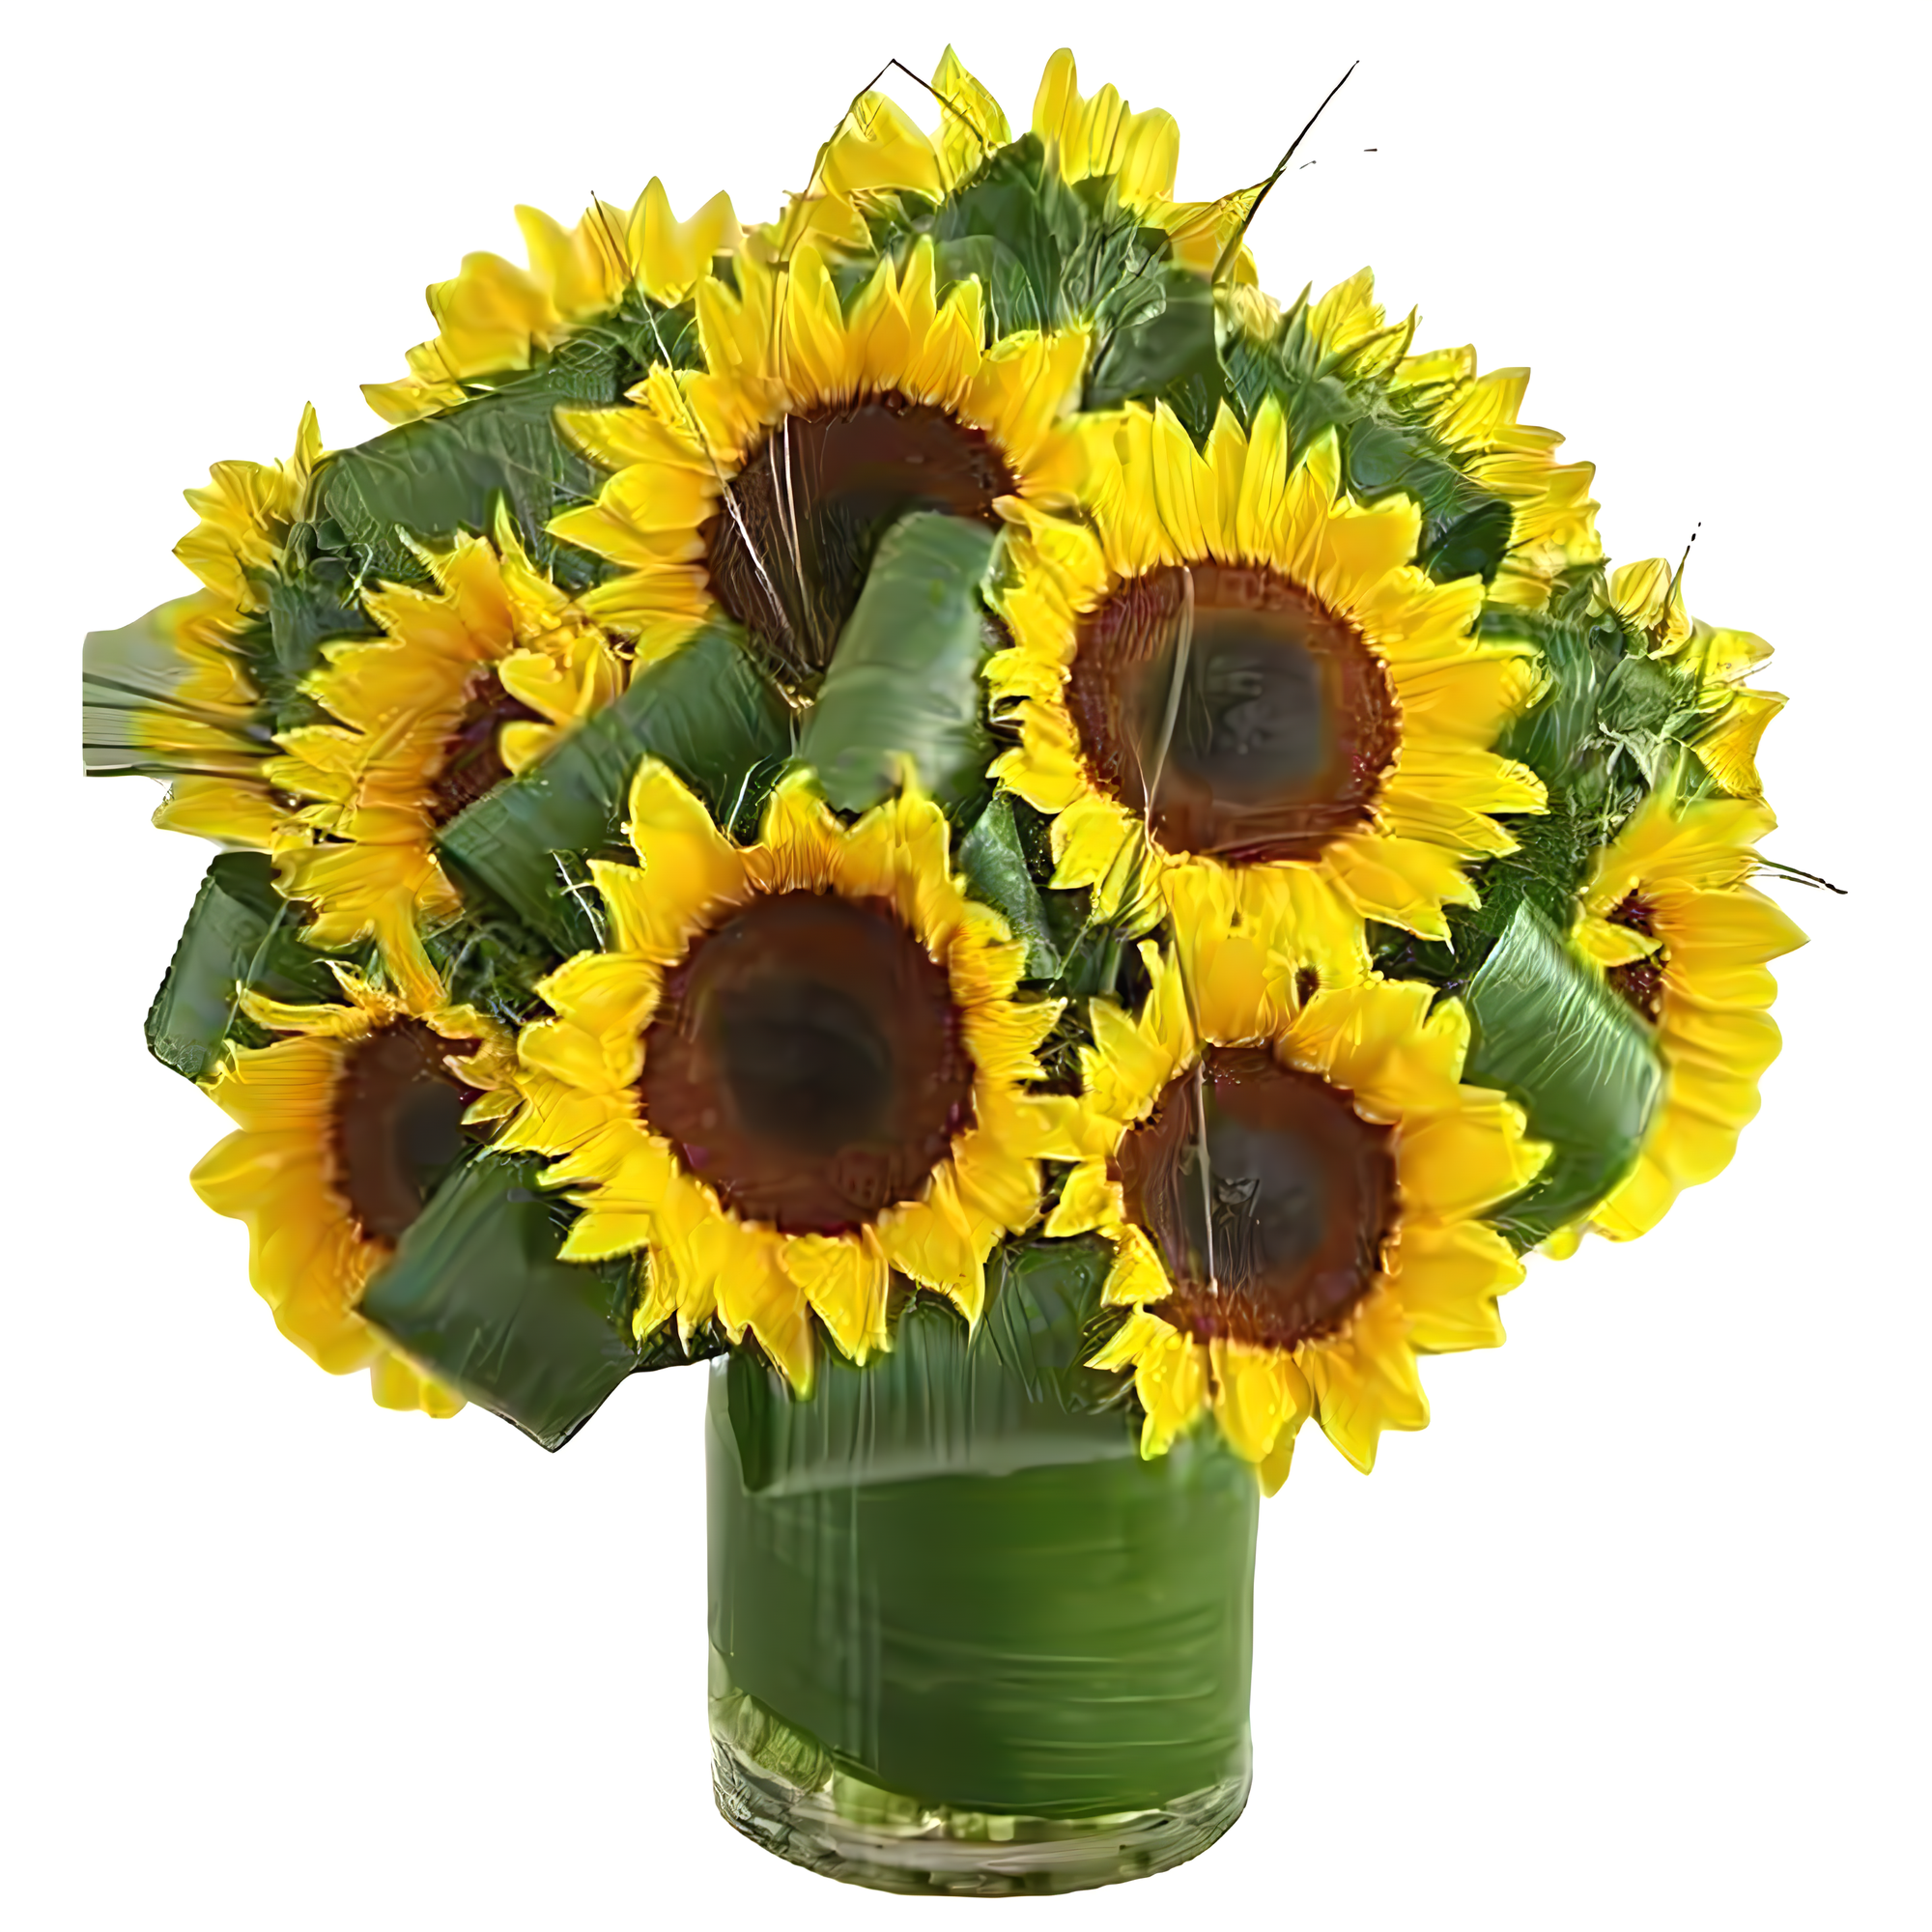 Manhattan Flower Delivery - Sun-Sational Sunflowers - Products > Corporate Gifts